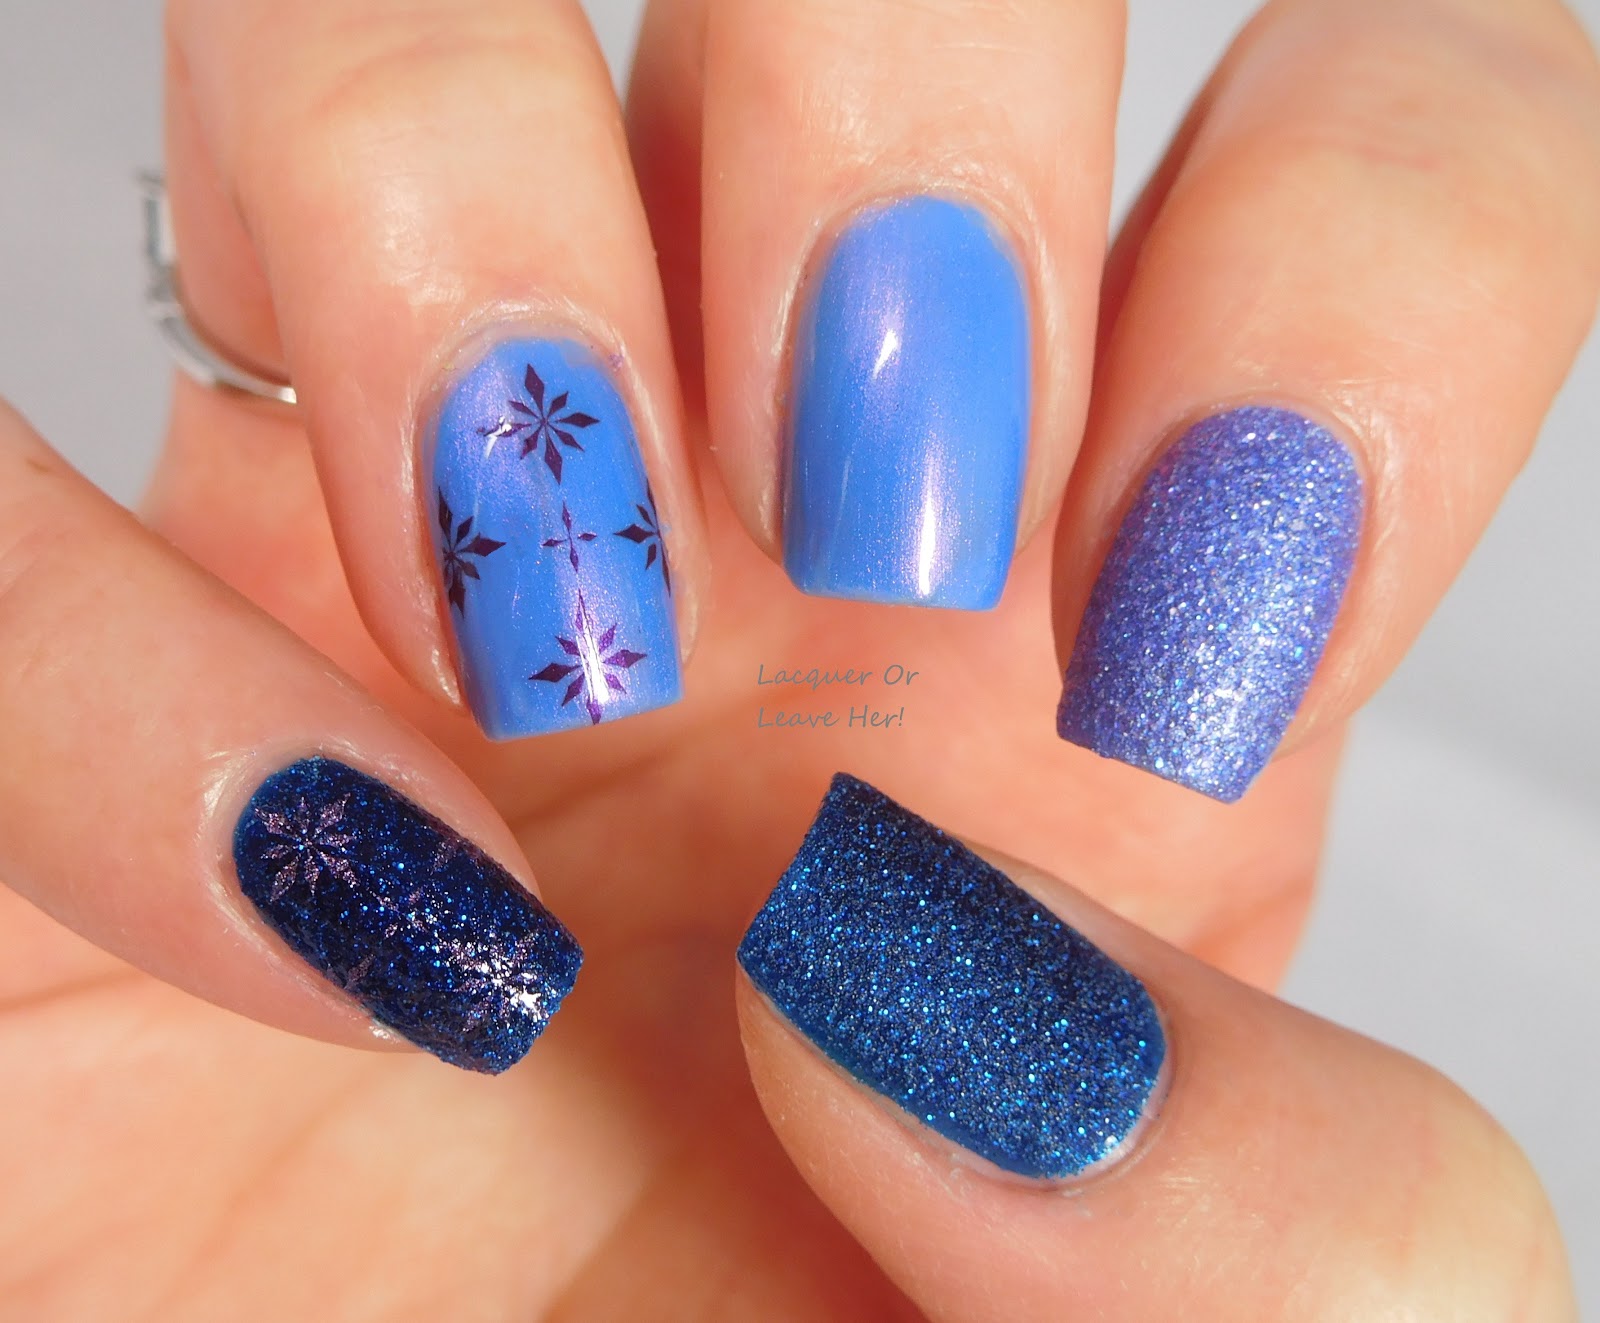 Lina Nail Art Winter 02 Swatches - wide 7